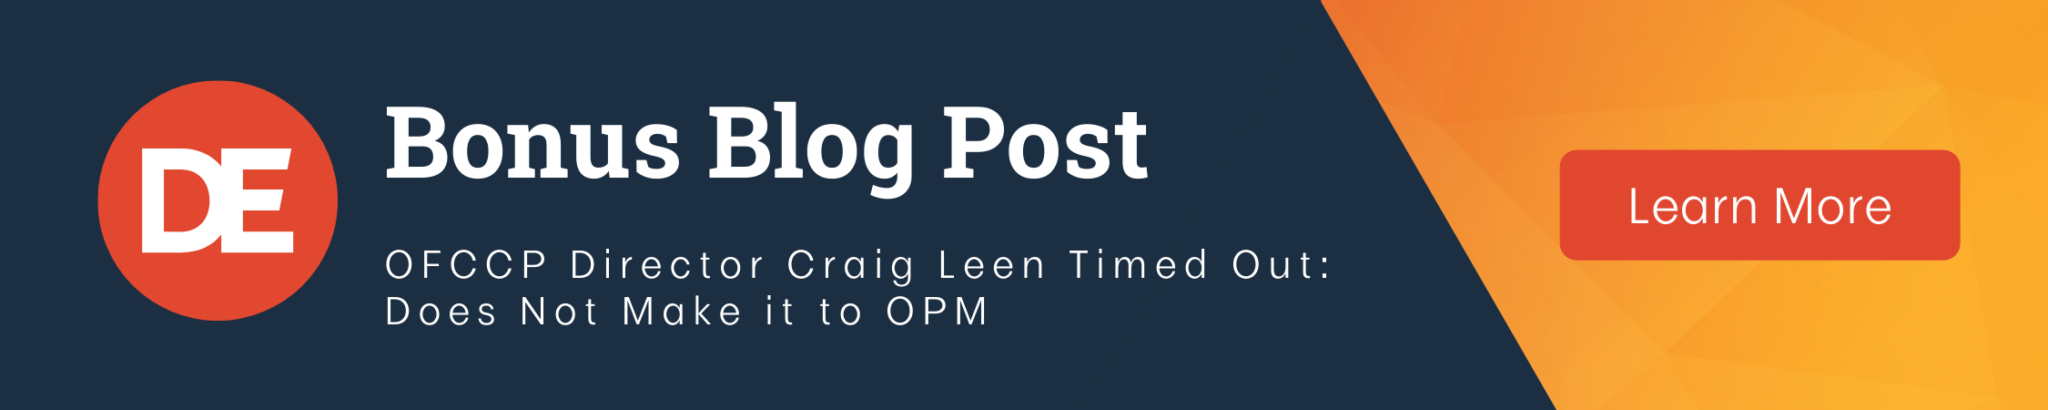 OFCCP Week In Review Bonus Blog Post | OFCCP Director Craig Leen Timed Out: Does Not Make it to OPM